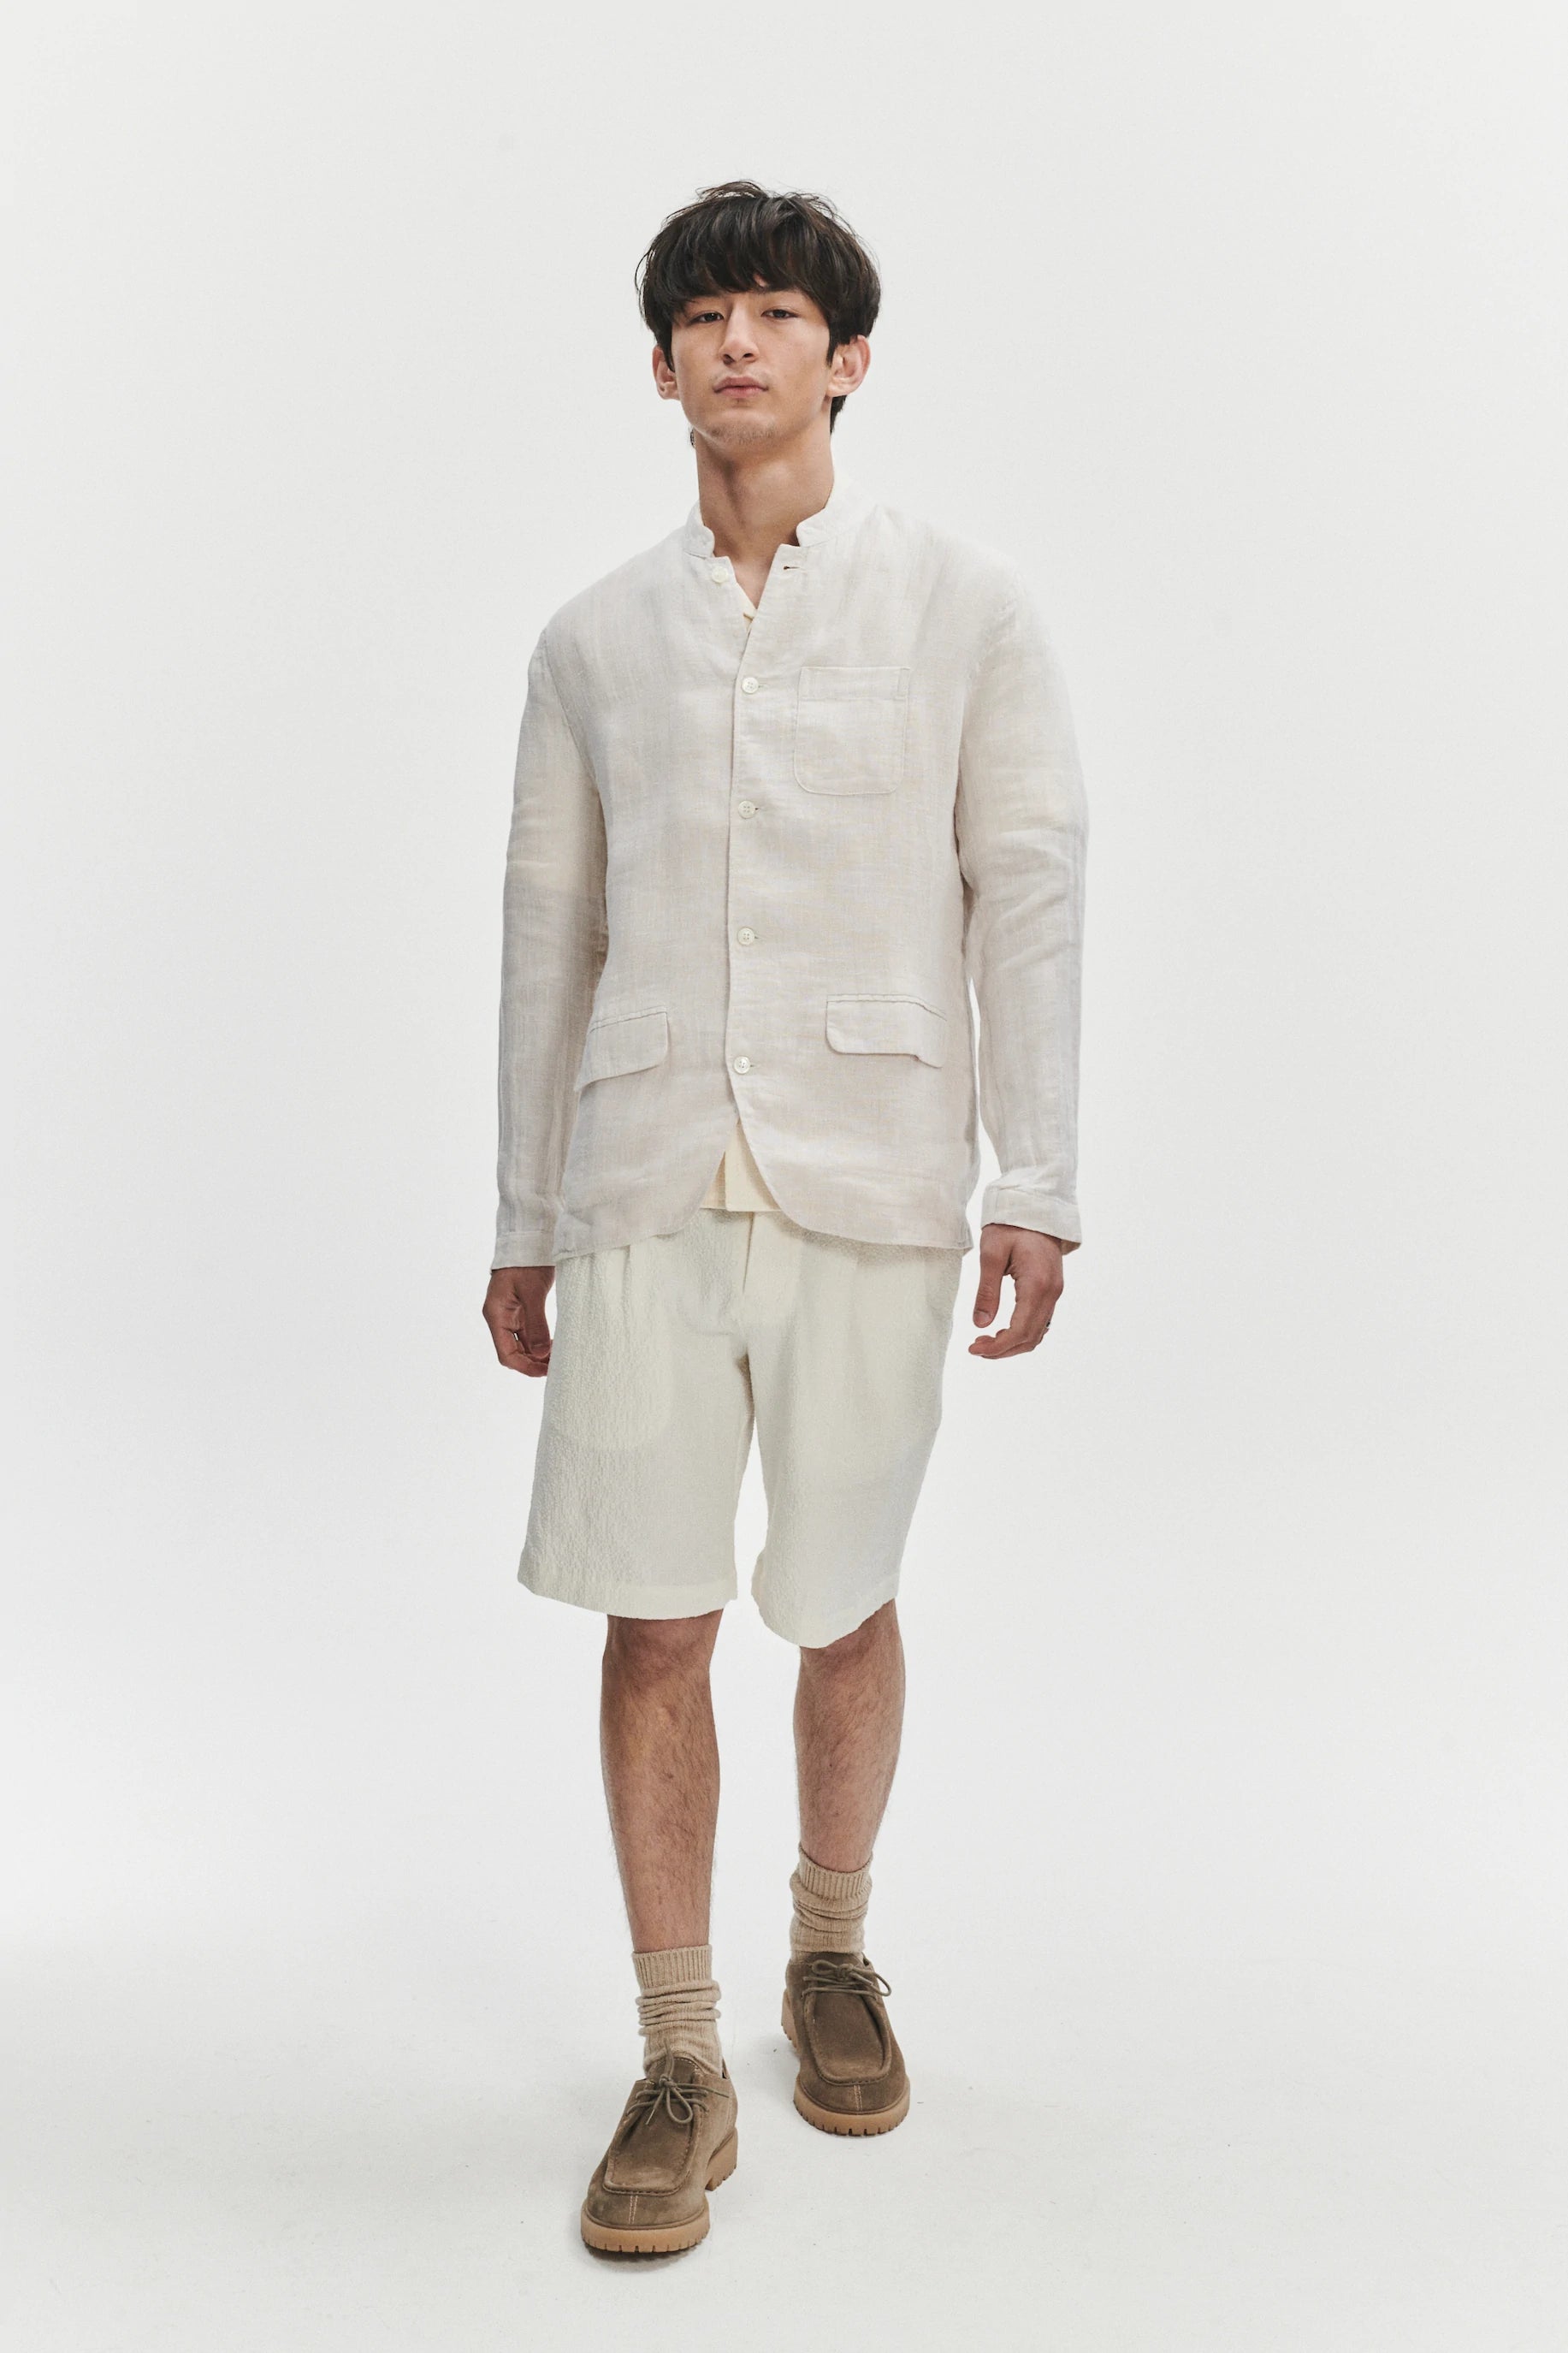 Strong Jacket in an Off-White Double Sided Fatigue Italian Linen and C -  Delikatessen